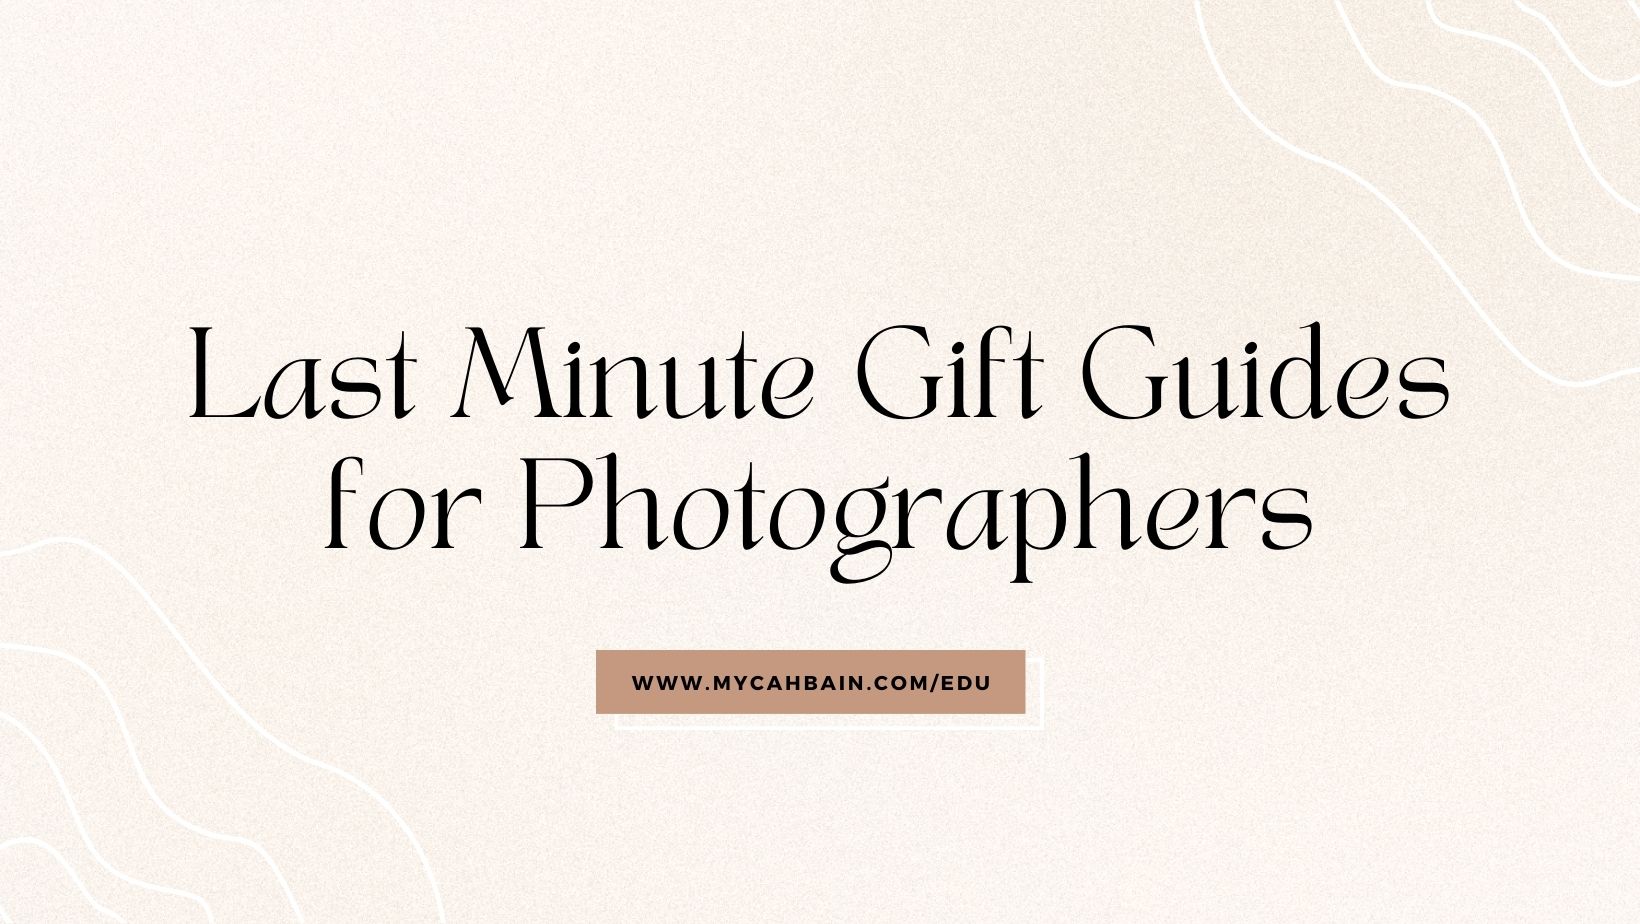 Layout design for last minute gift guide for photographers